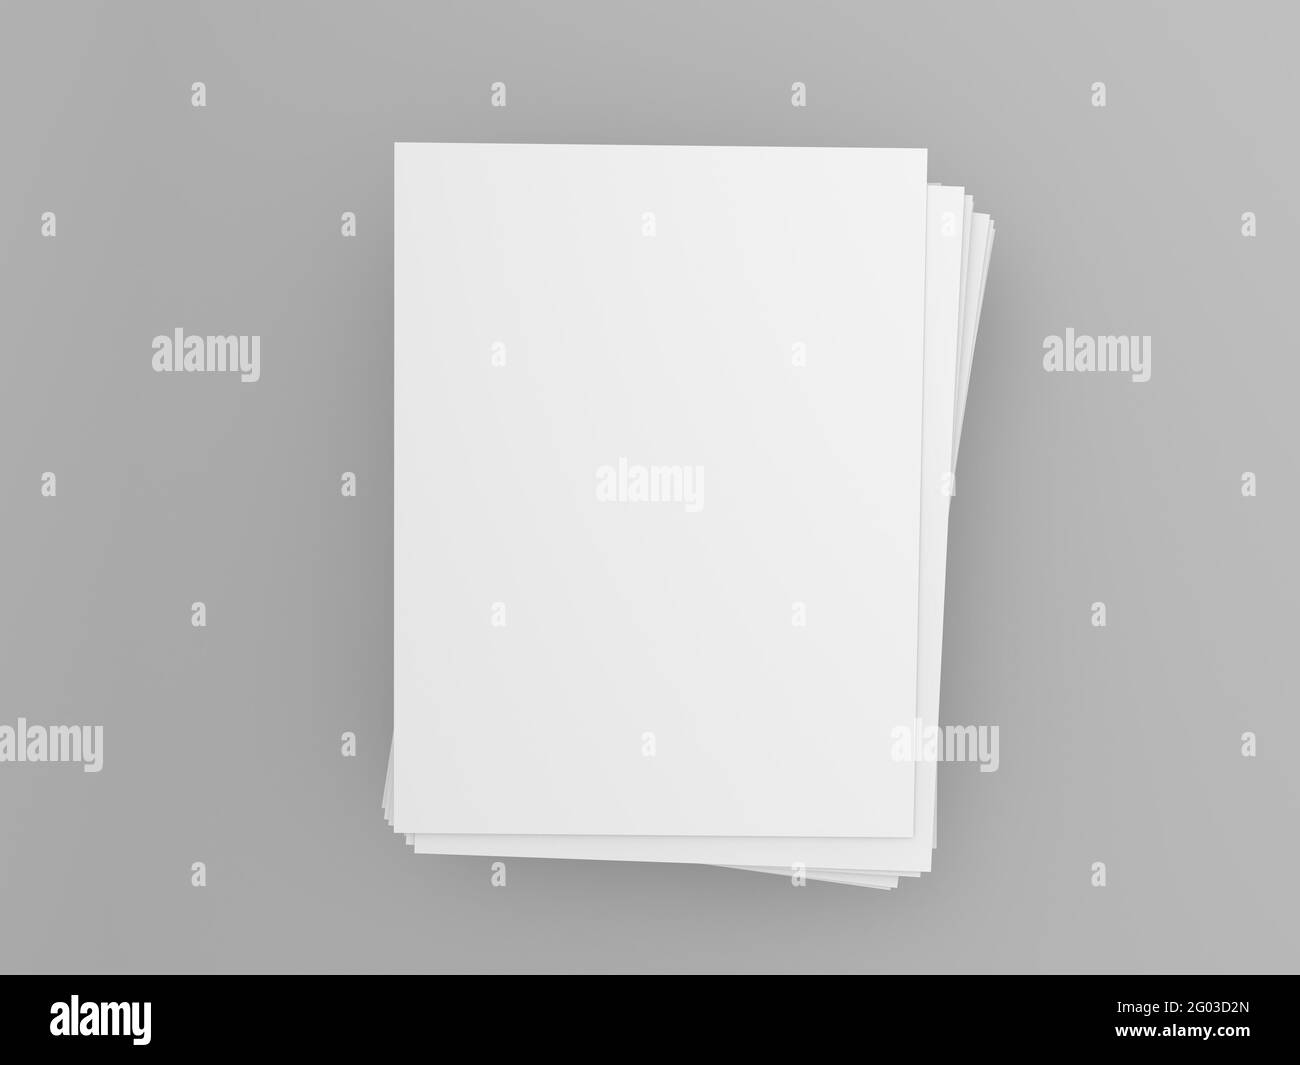 Stack of A4 paper on a gray background. 3d render illustration. Stock Photo